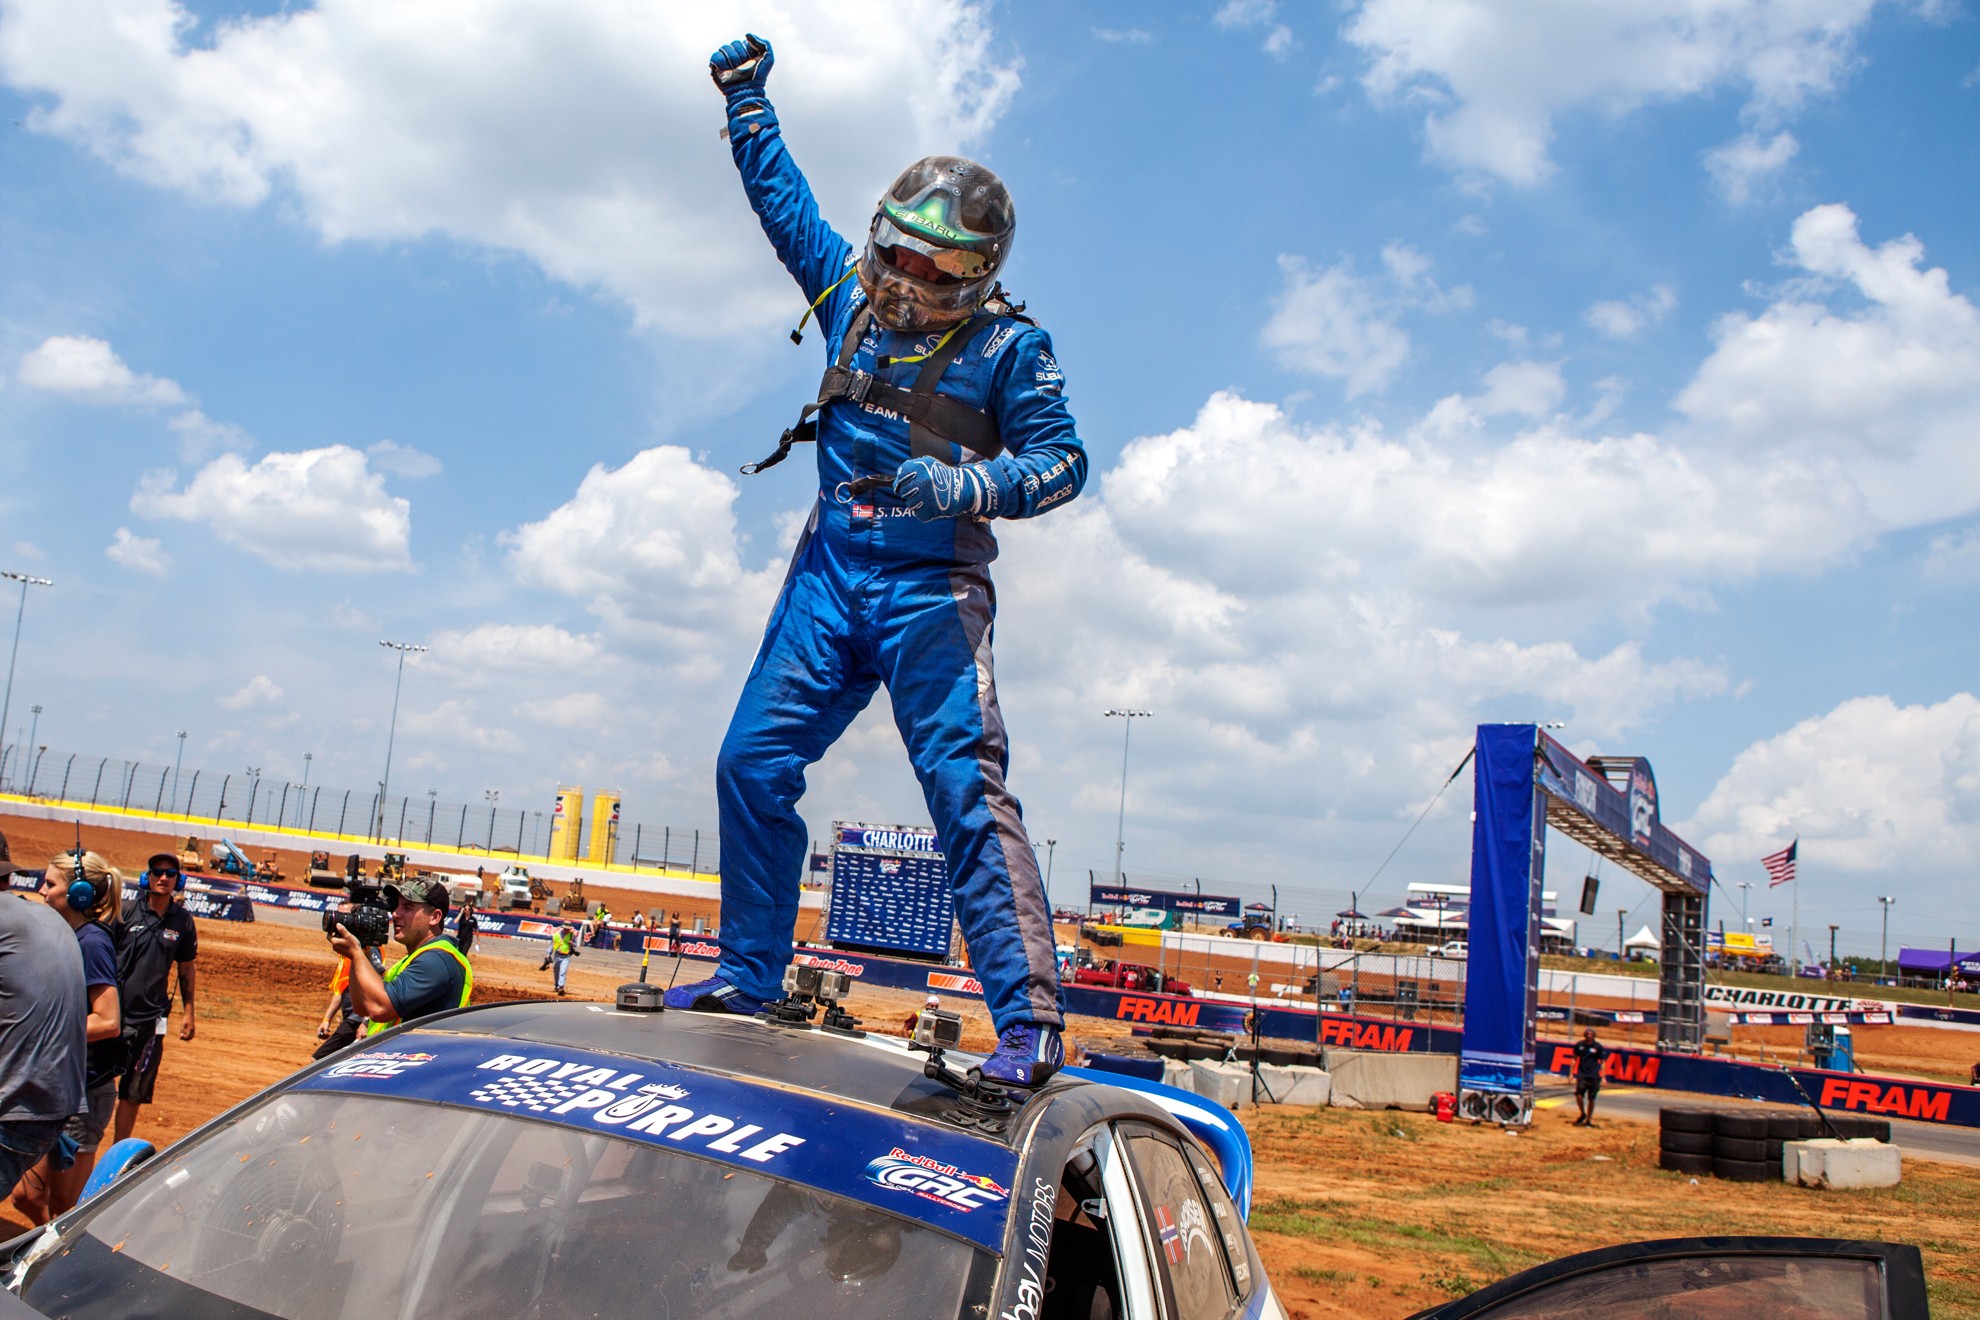 Subaru Rally Team USA driver Sverre Isachsen battled his way to an impressive 2nd Overall finish at Red Bull Global Rallycross Charlotte